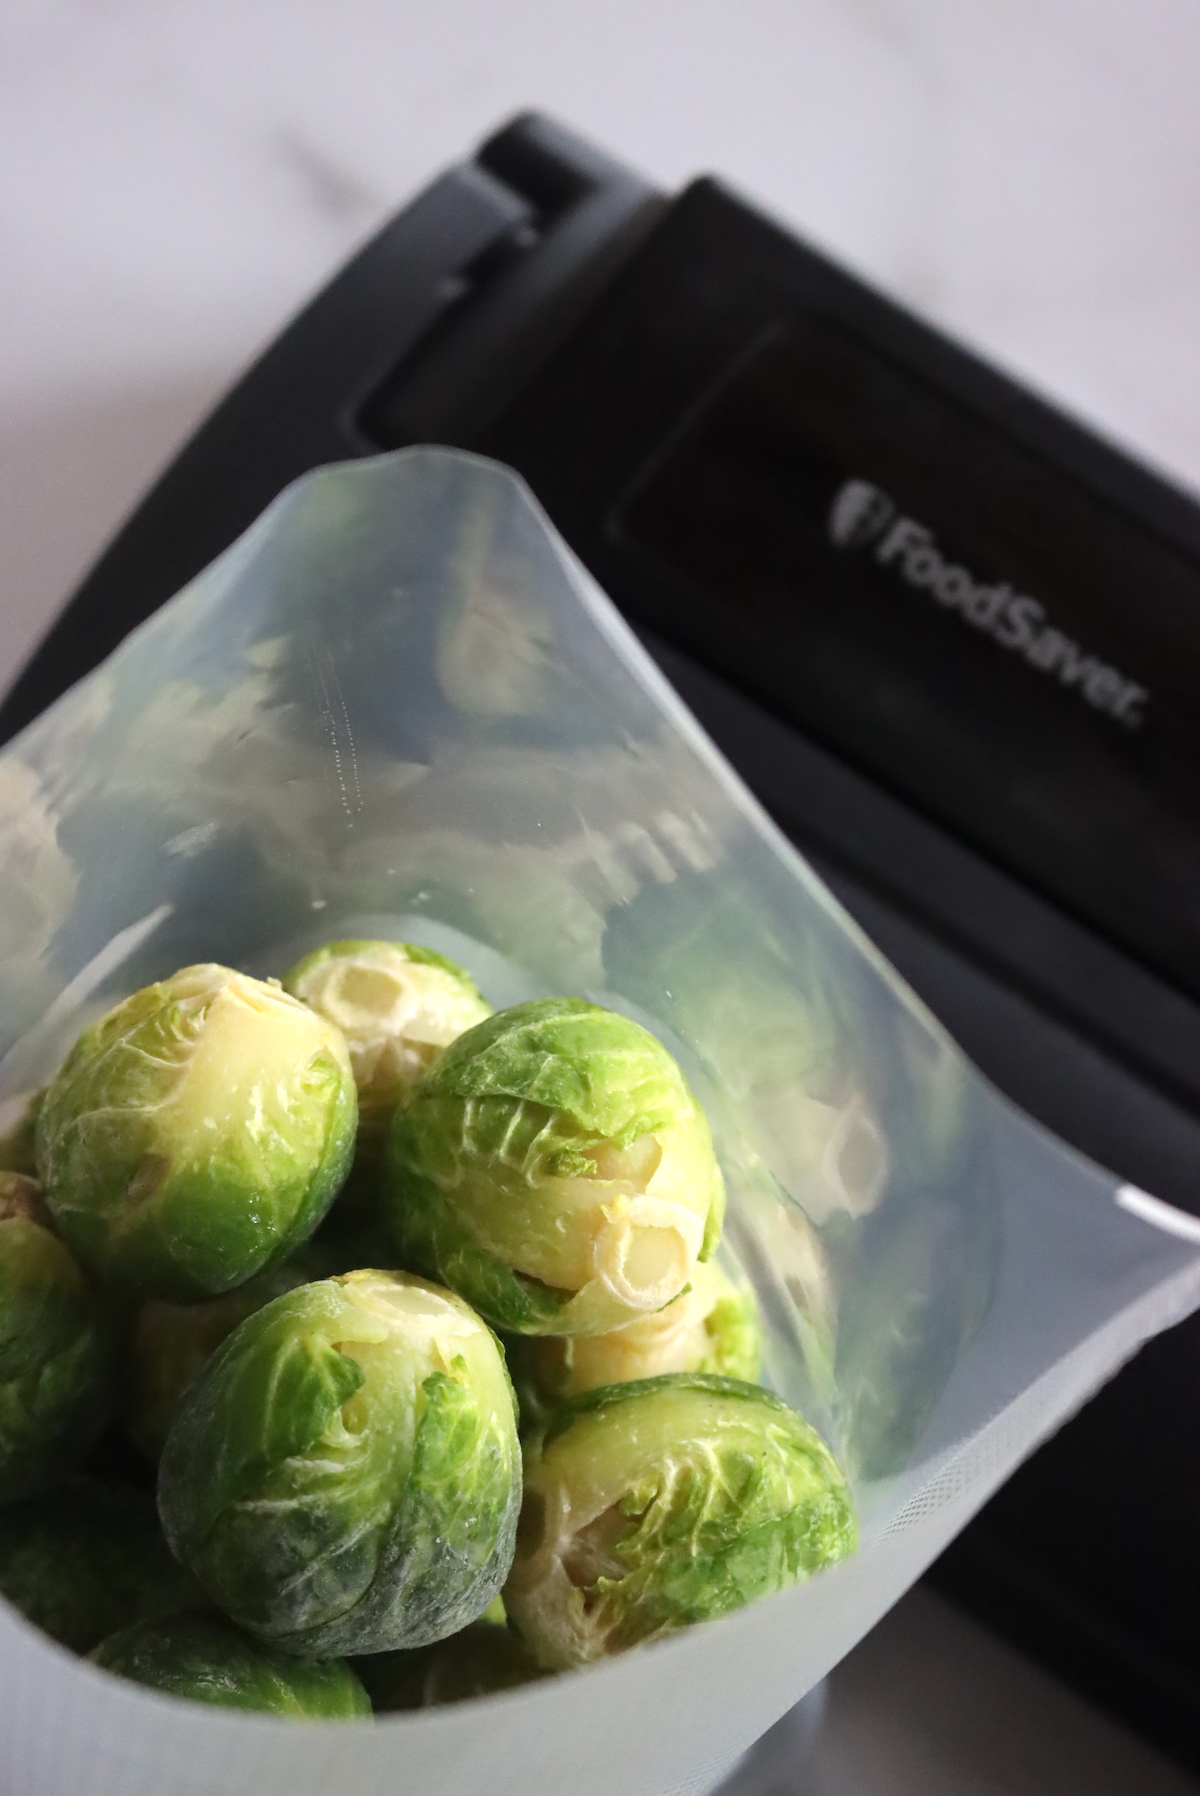 Freezing Brussels Sprouts